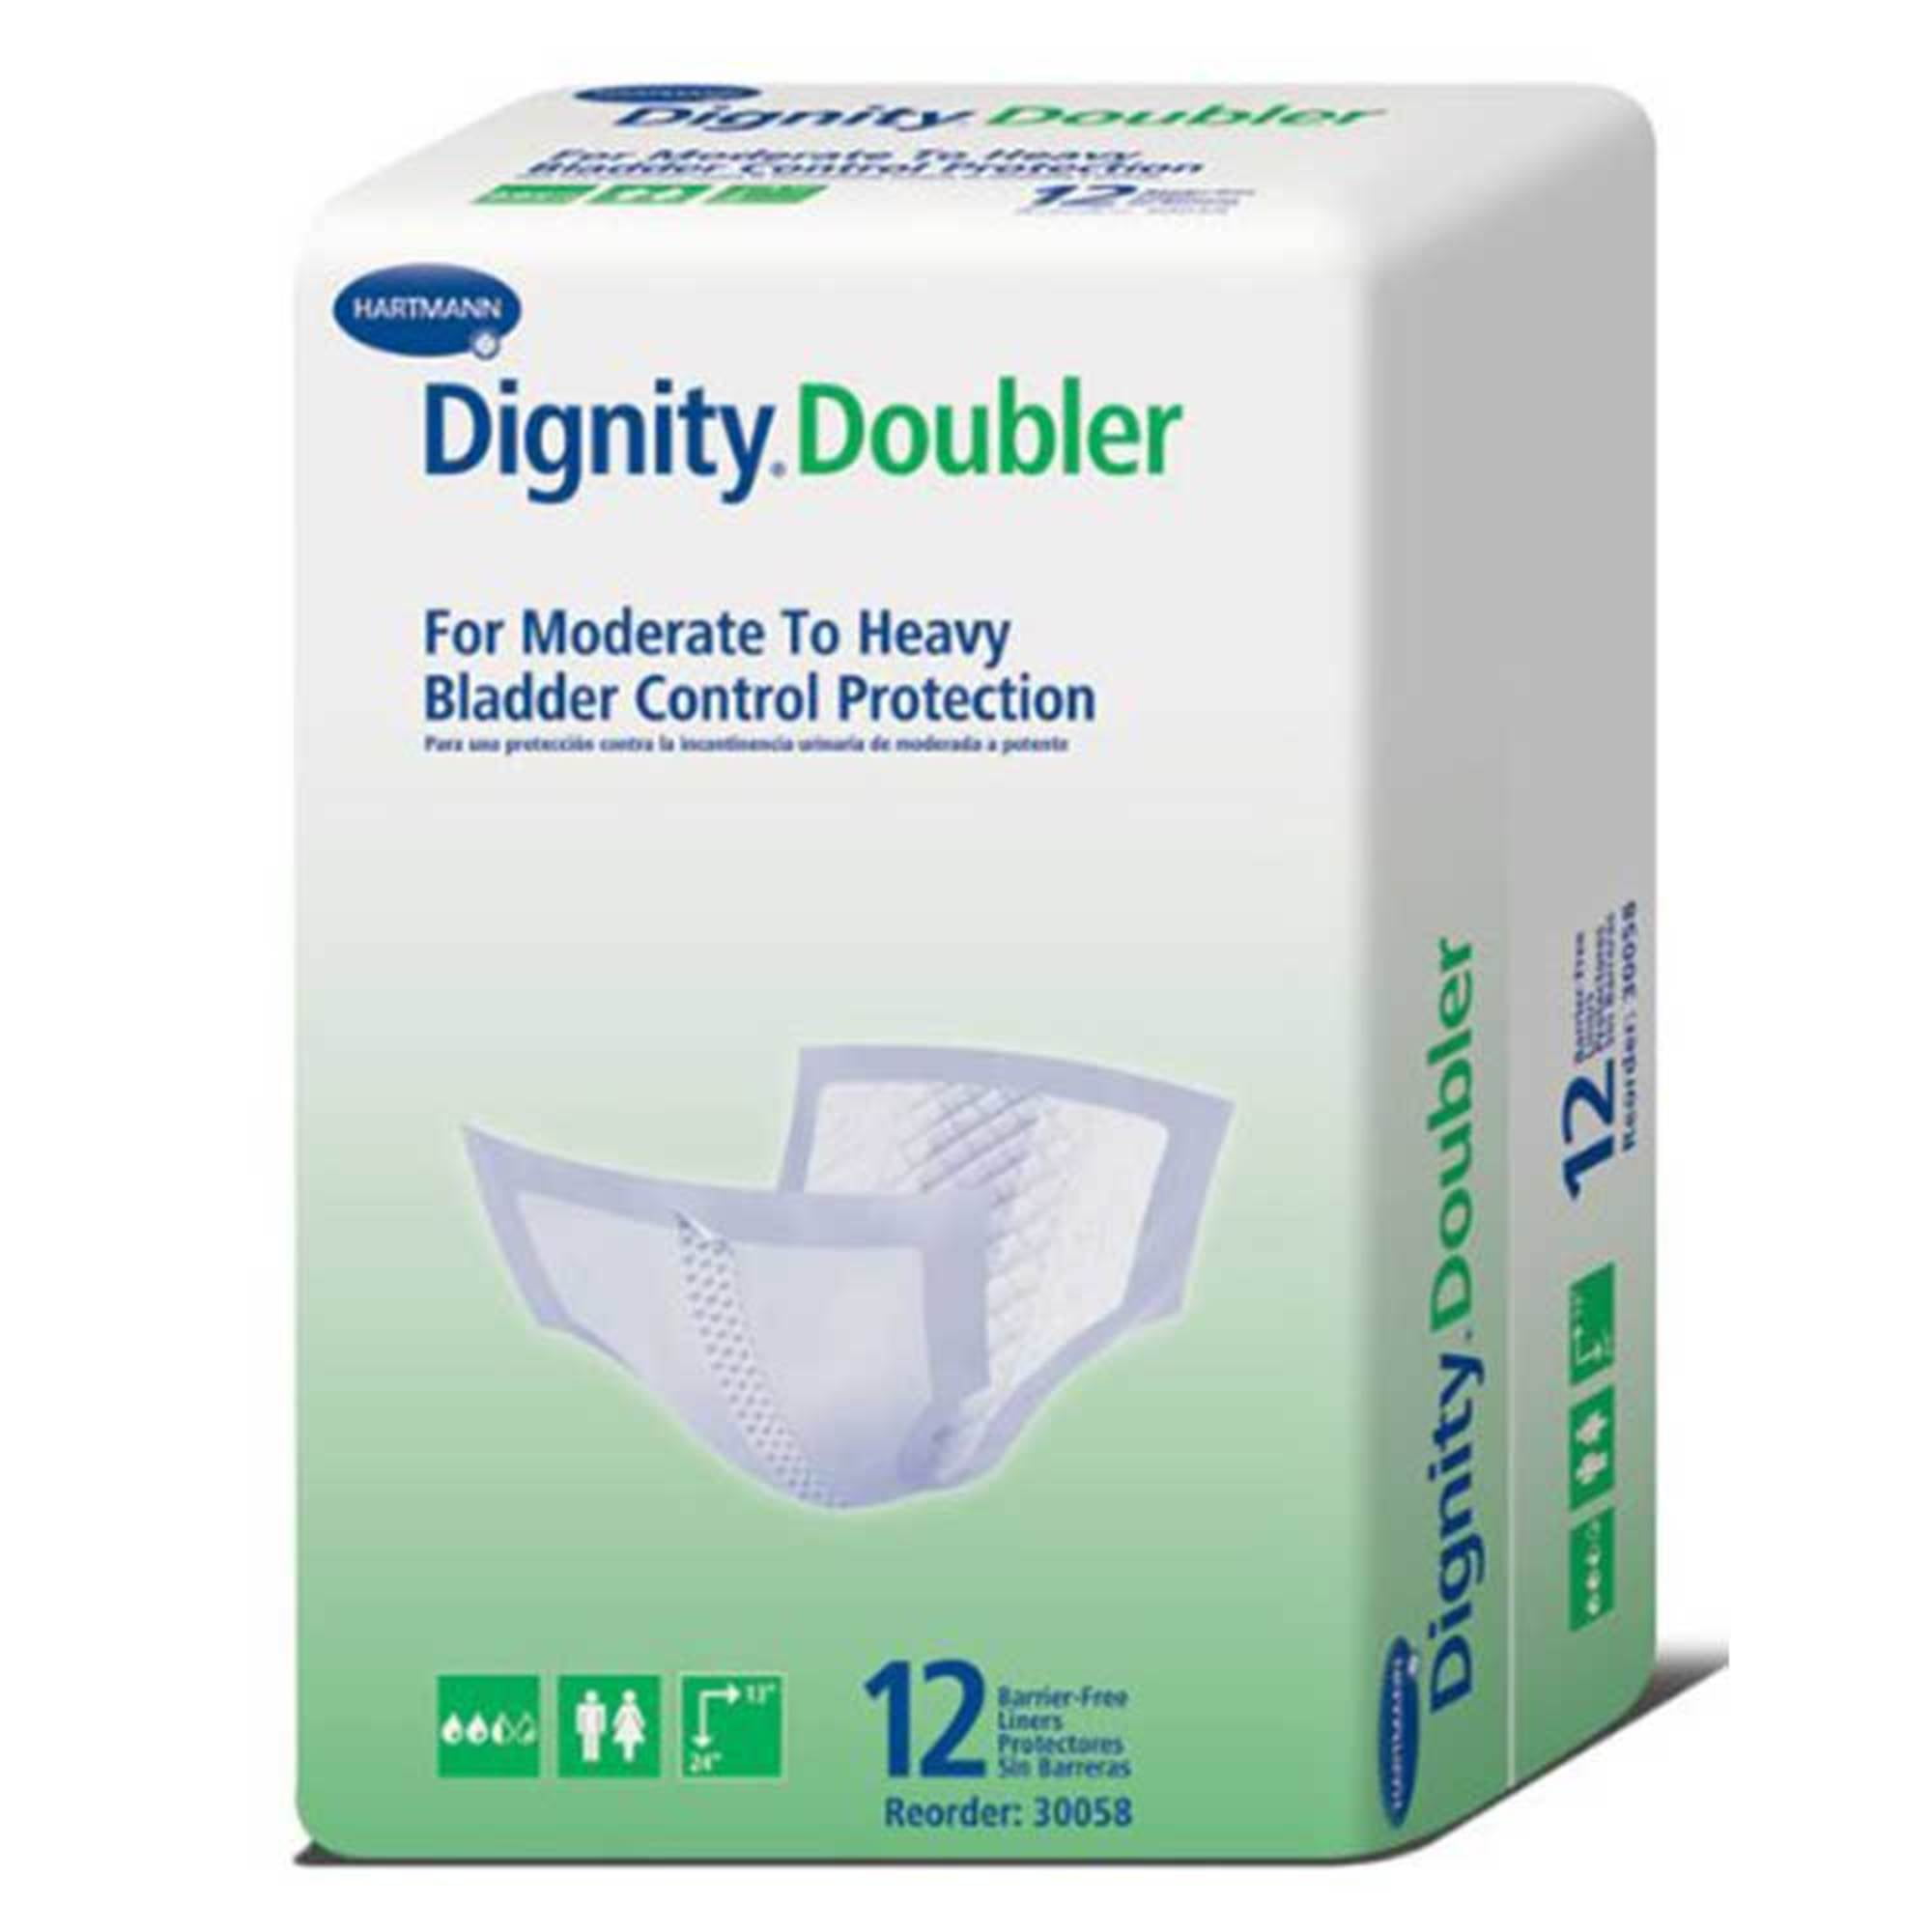 Always Discreet Boutique Incontinence Pads, Moderate Absorbency, Regular  Length, 48 CT 